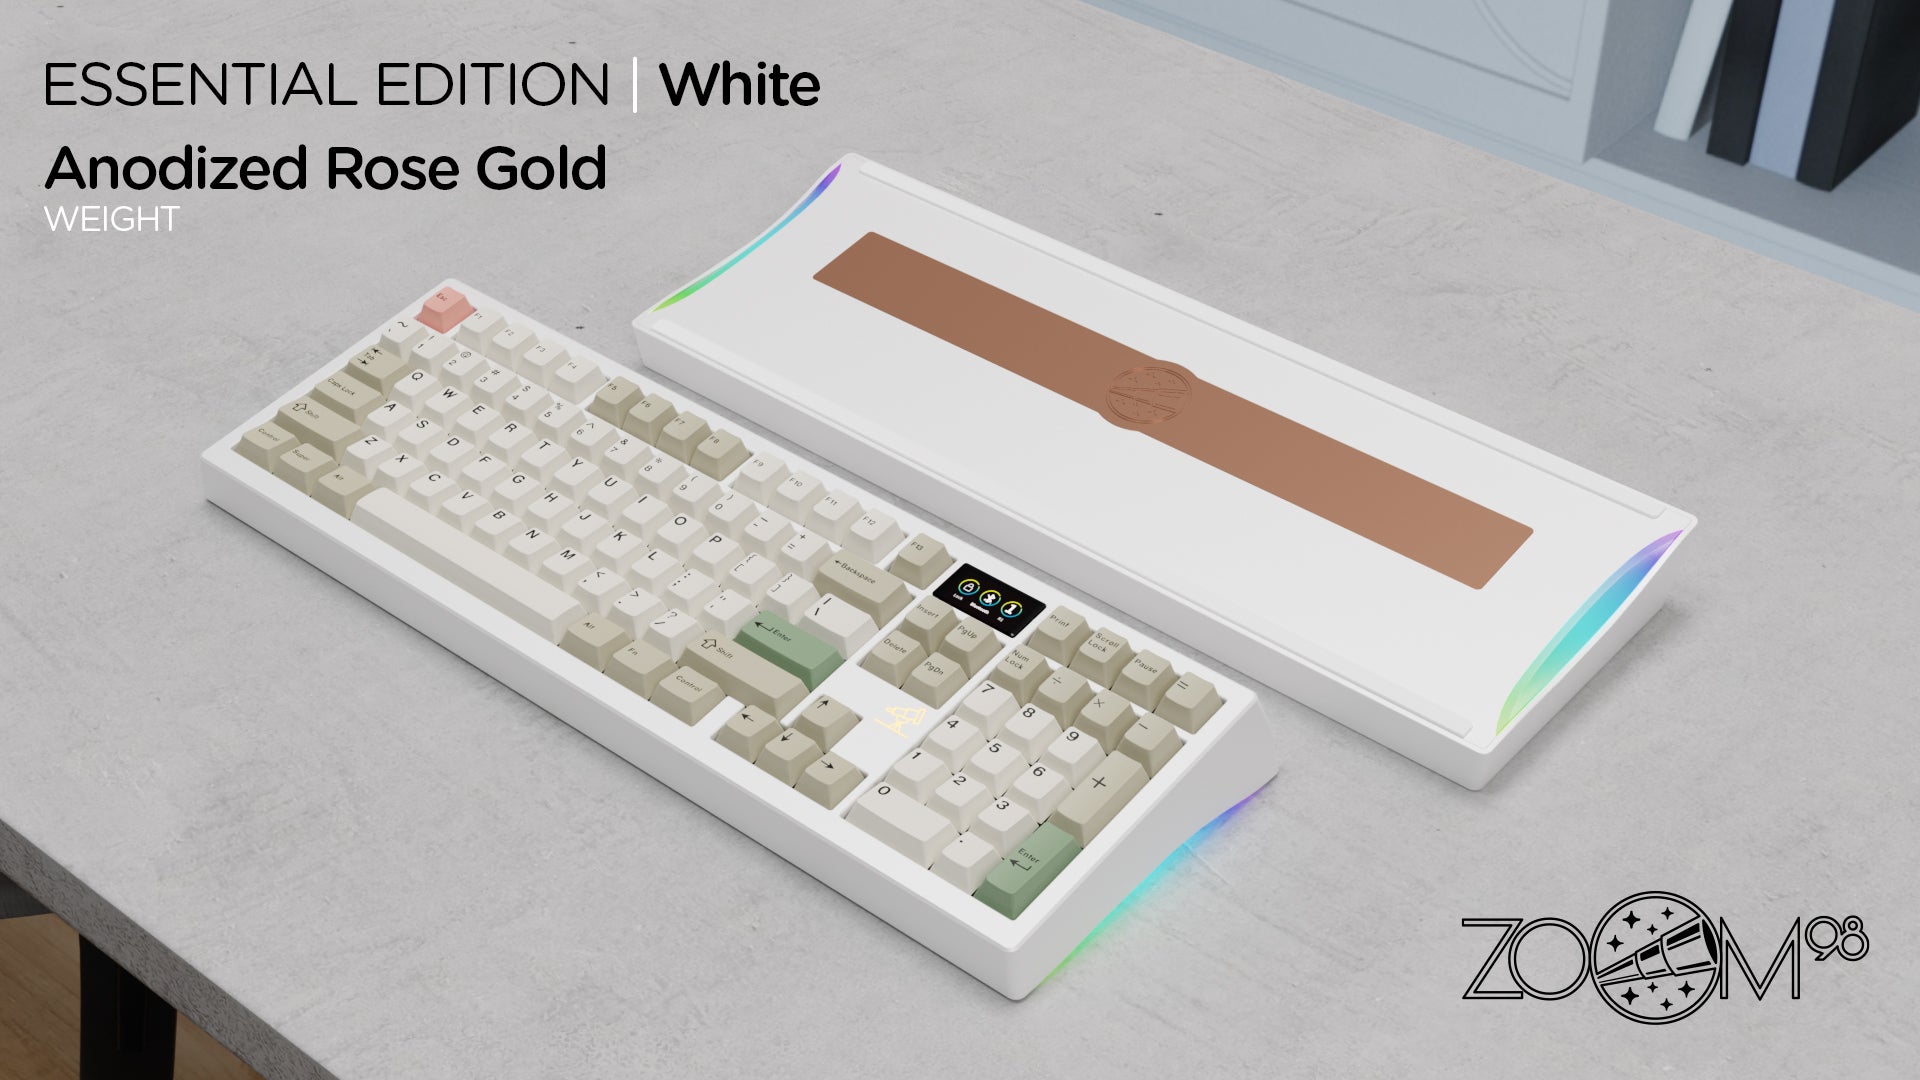 Zoom98 EE White